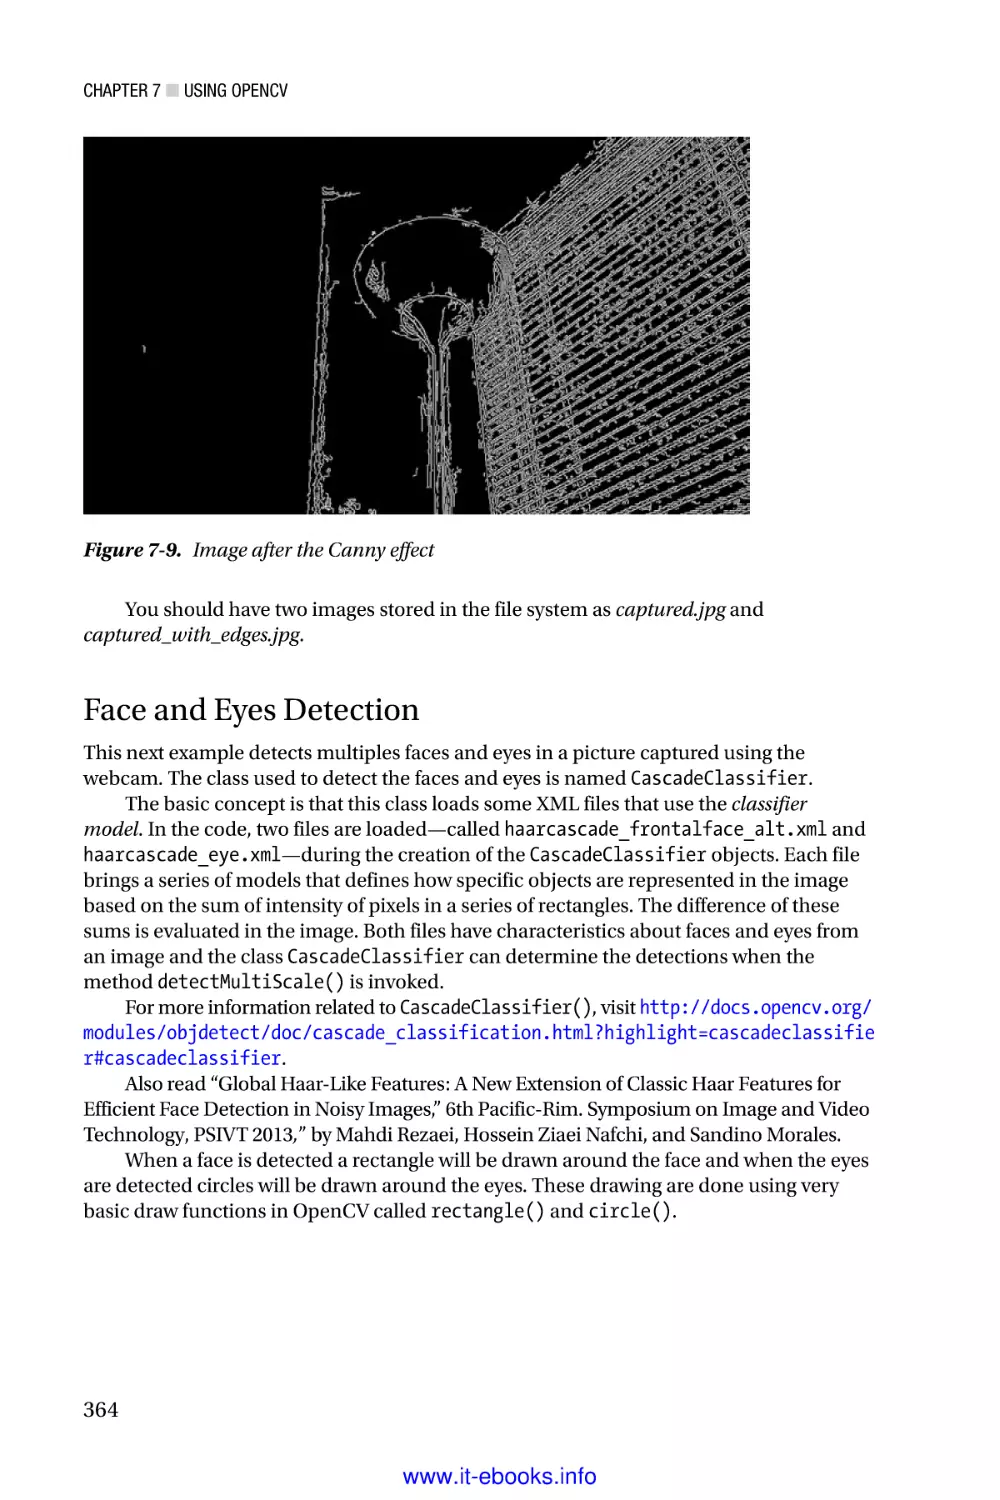 Face and Eyes Detection